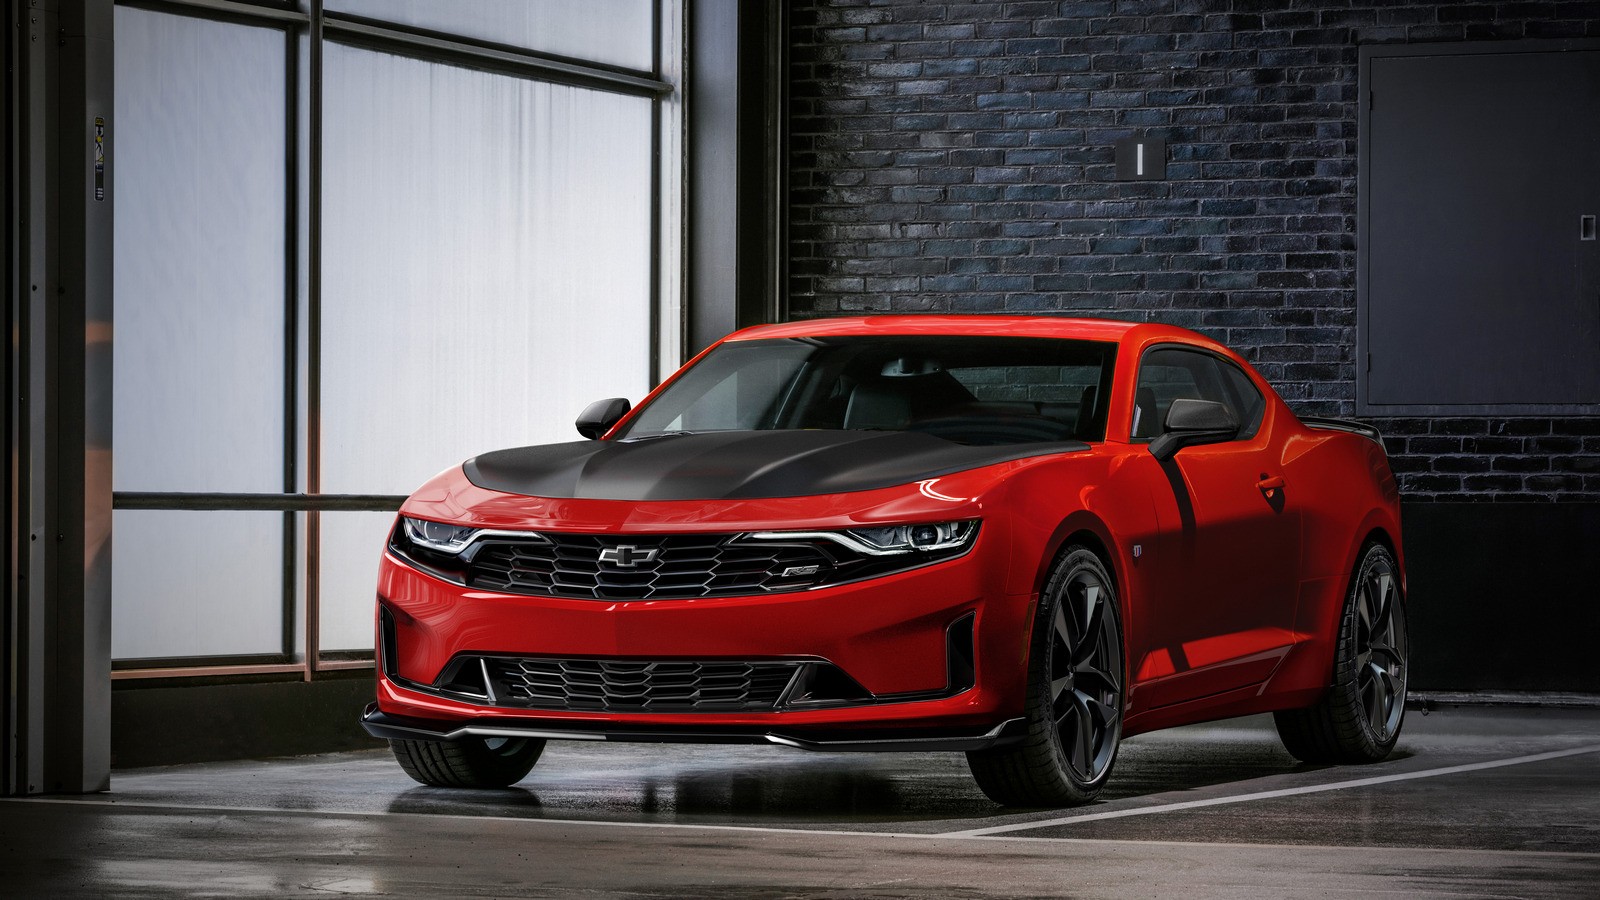 The 2019 Camaro Turbo 1LE joins the track-focused 1LE lineup, of